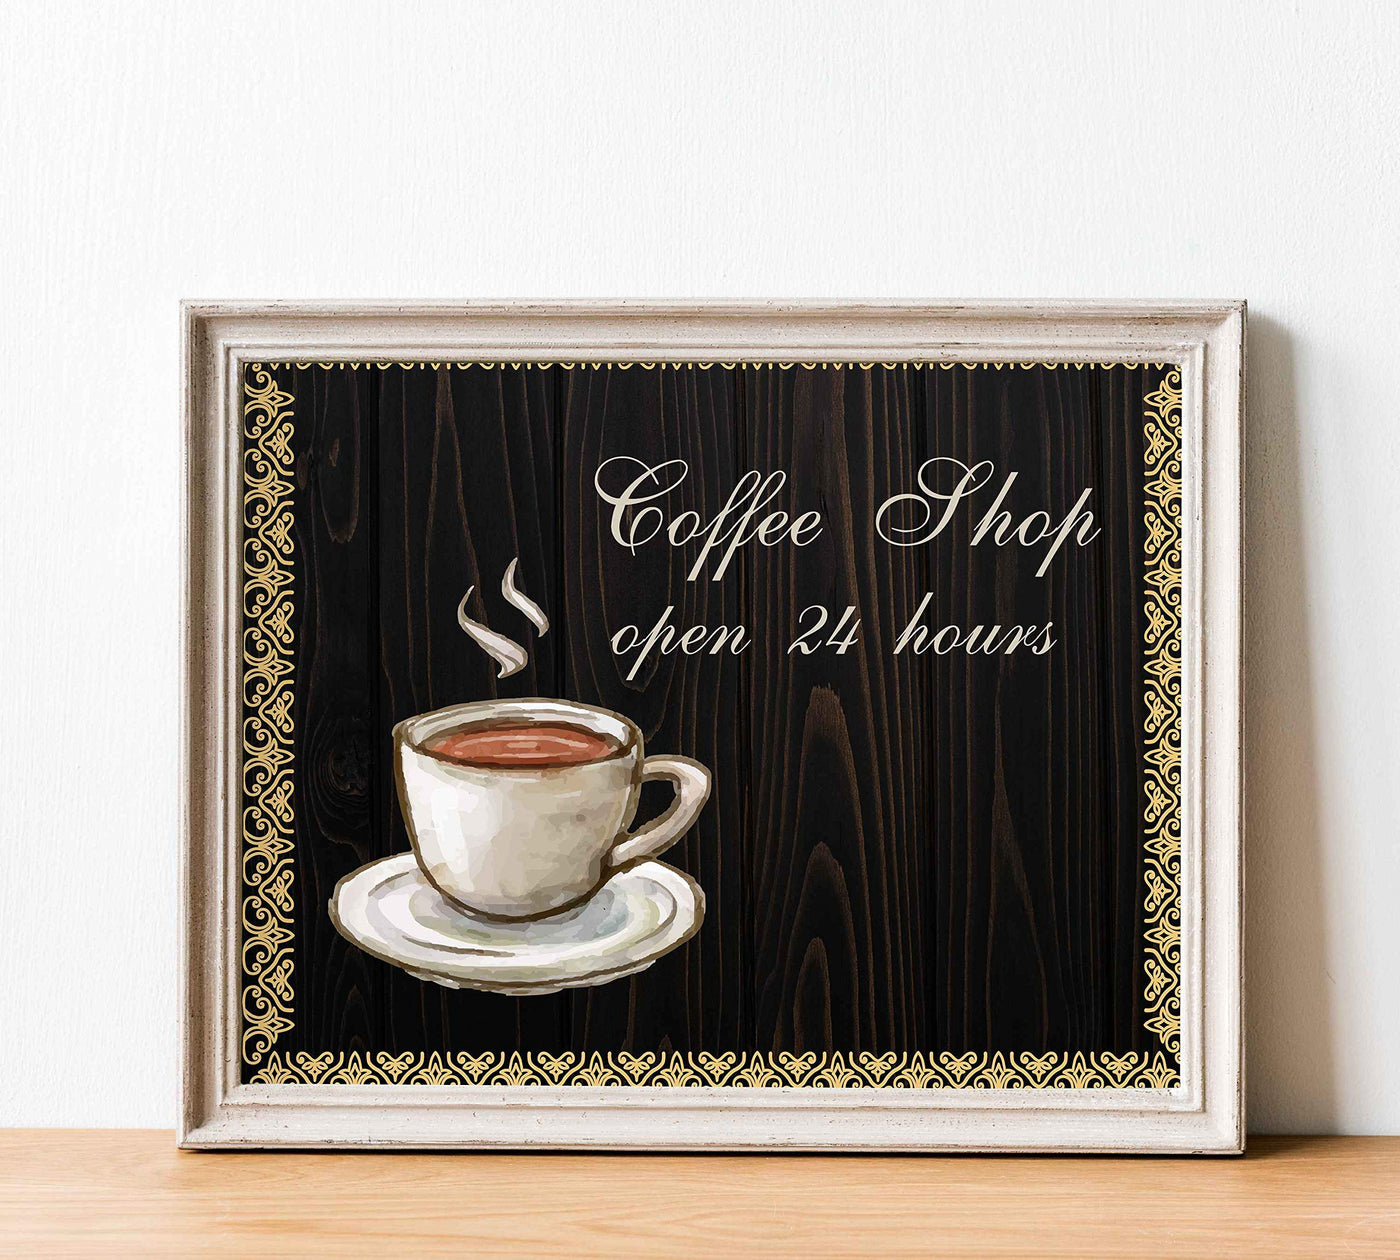 Coffee Shop-Open 24 Hours Vintage Coffee Wall Art Sign -10 x 8" Retro Poster Print-Ready to Frame. Perfect Wall Decor for Home-Kitchen-Farmhouse-Office-Cafe-Java Bar. Great Gift for Coffee Lovers!